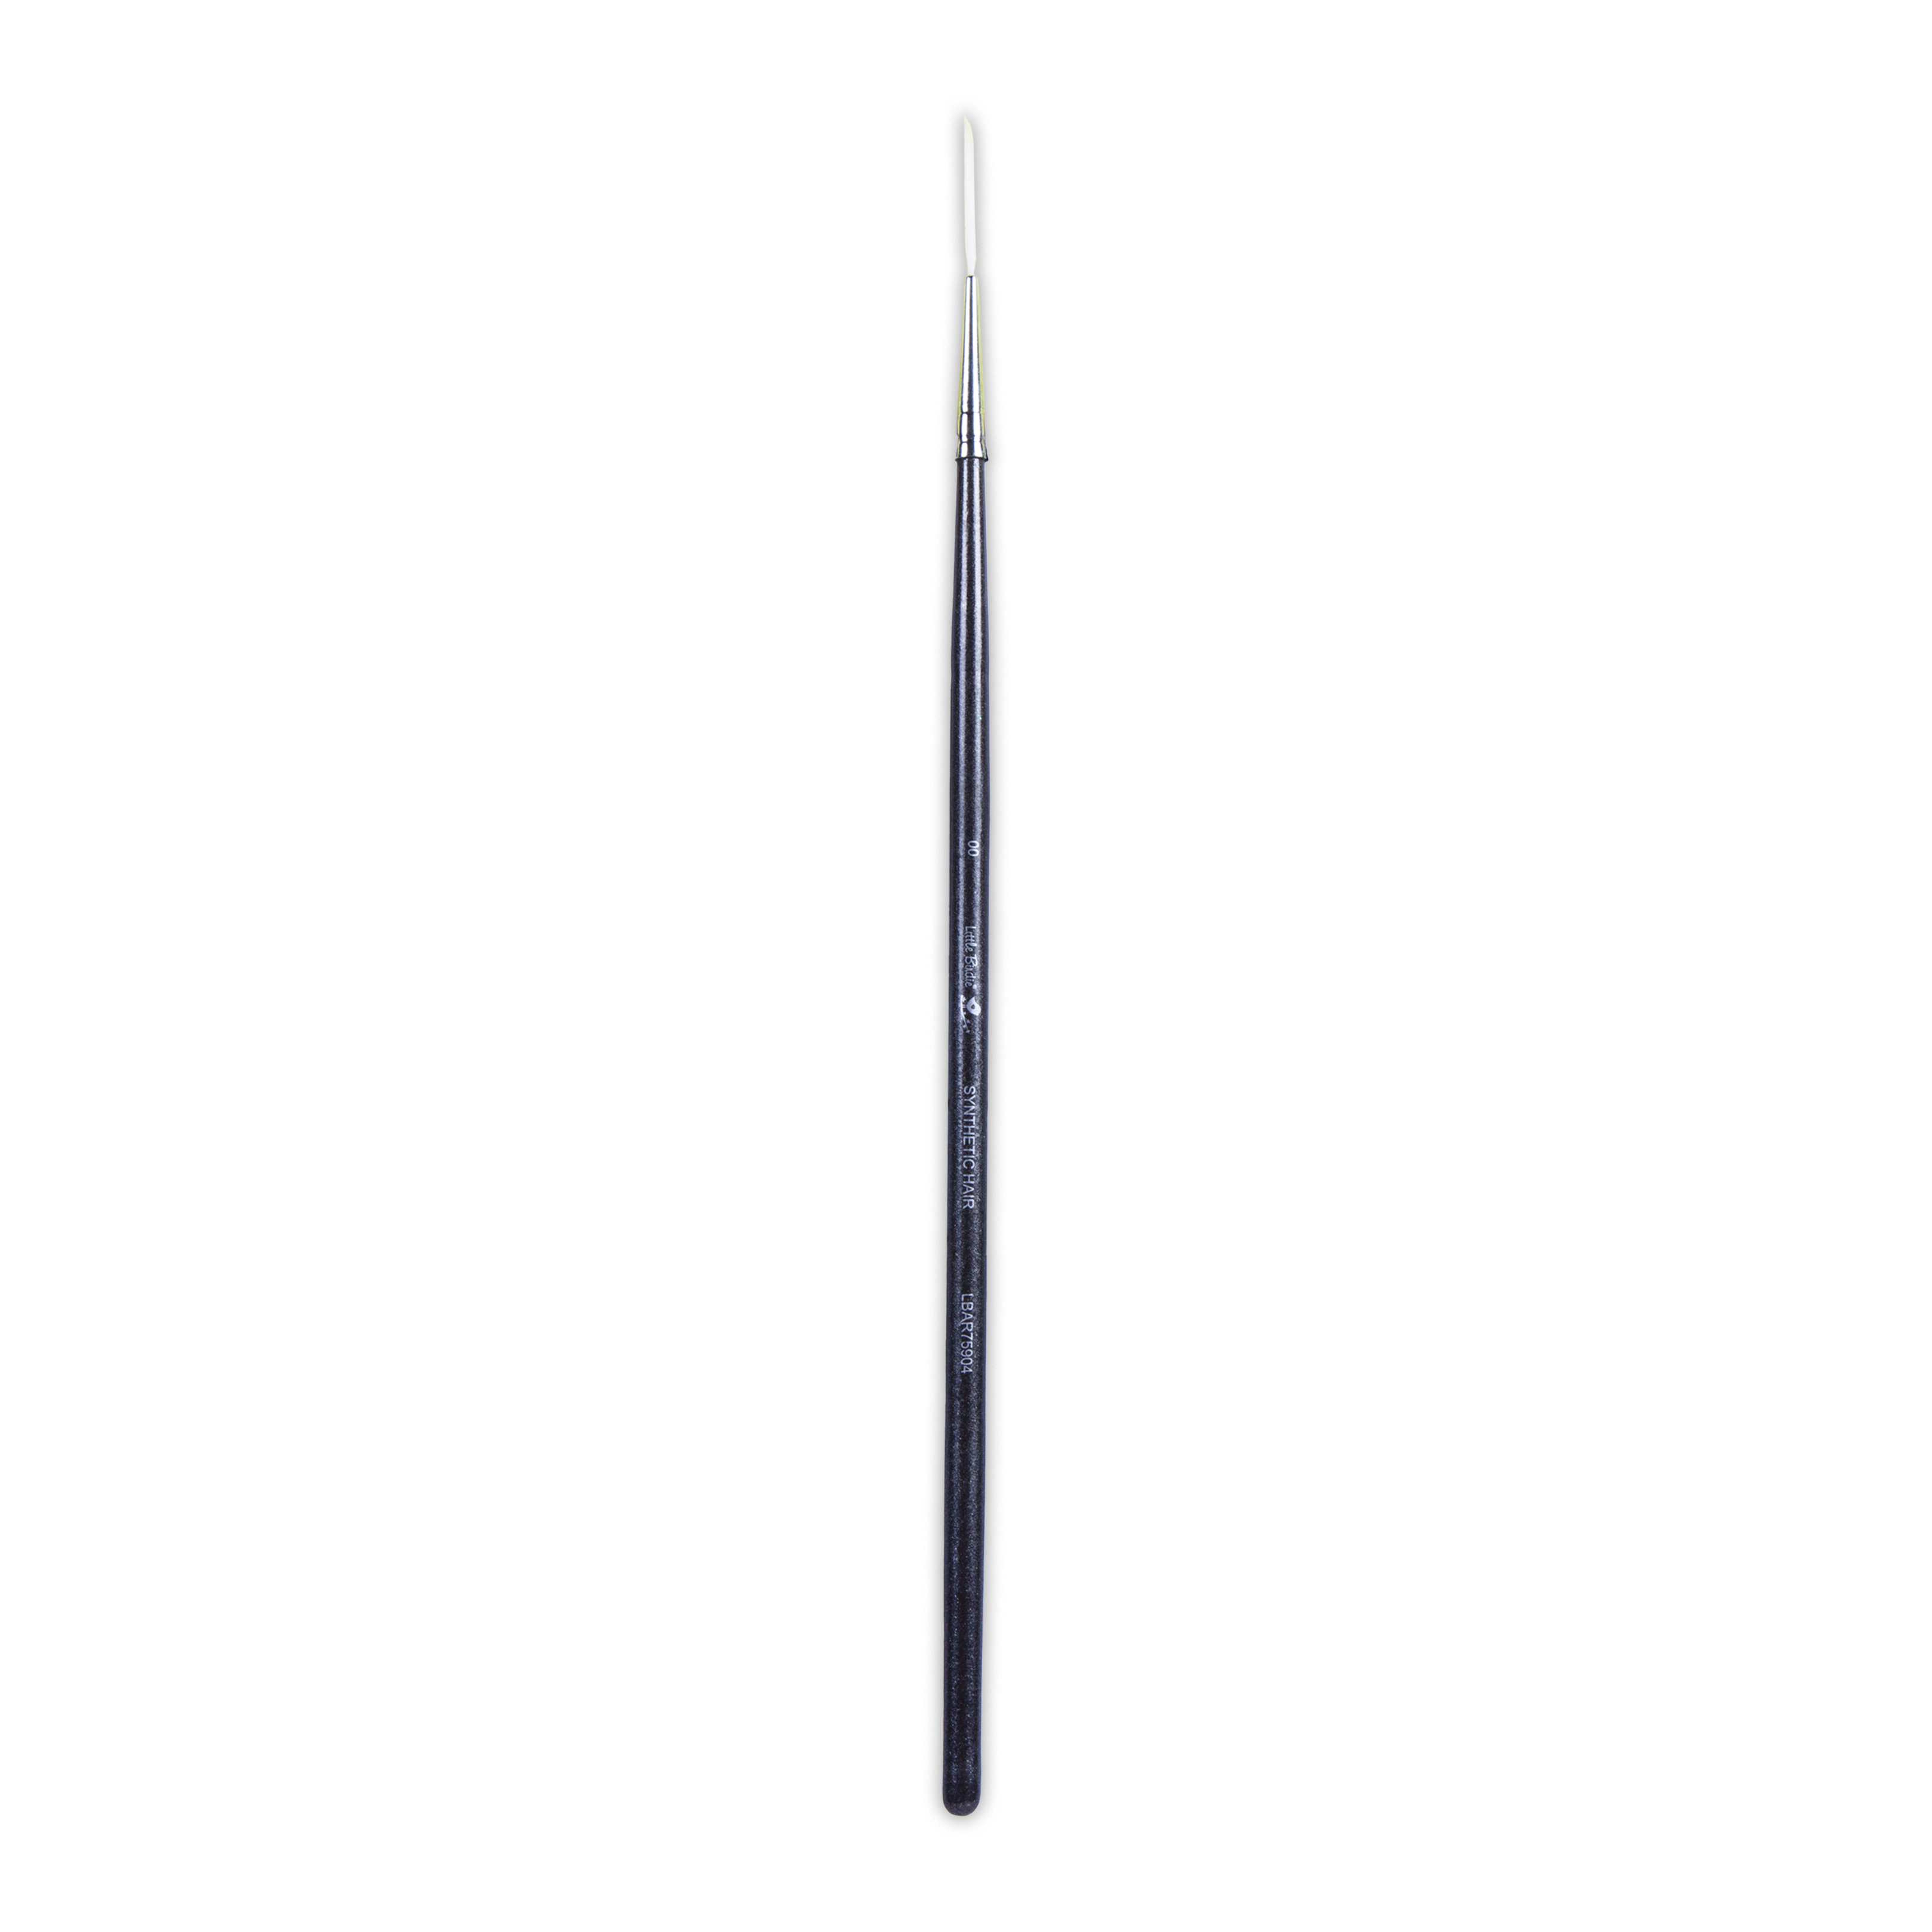 Premium Liner Brush Synthetic Hair Handle Length 200mm Size 00 1 pc